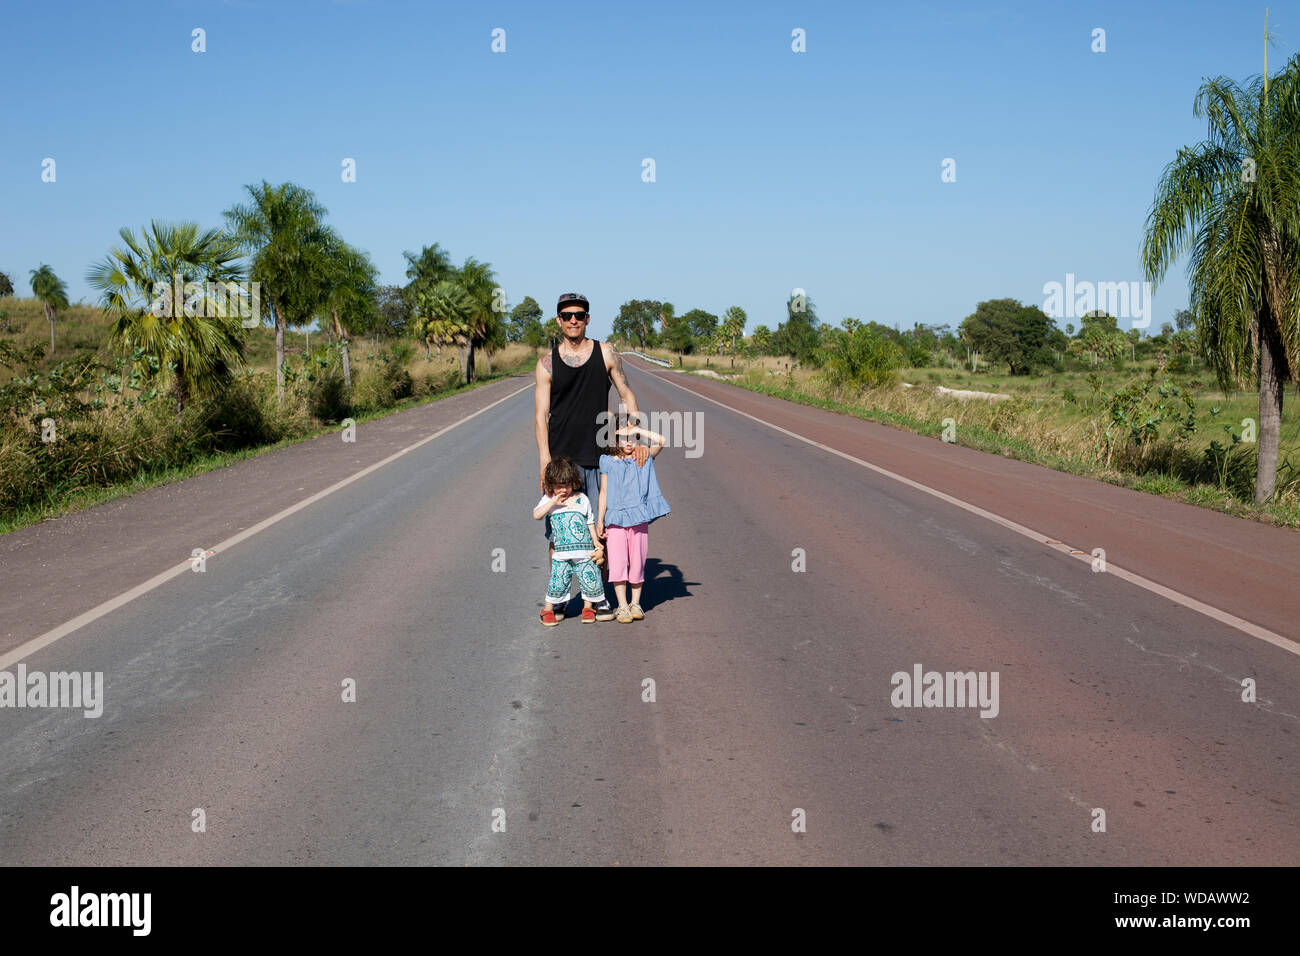 Mid adult man and children standing on rural road in the Pantanal Wetlands, Brazil Stock Photo